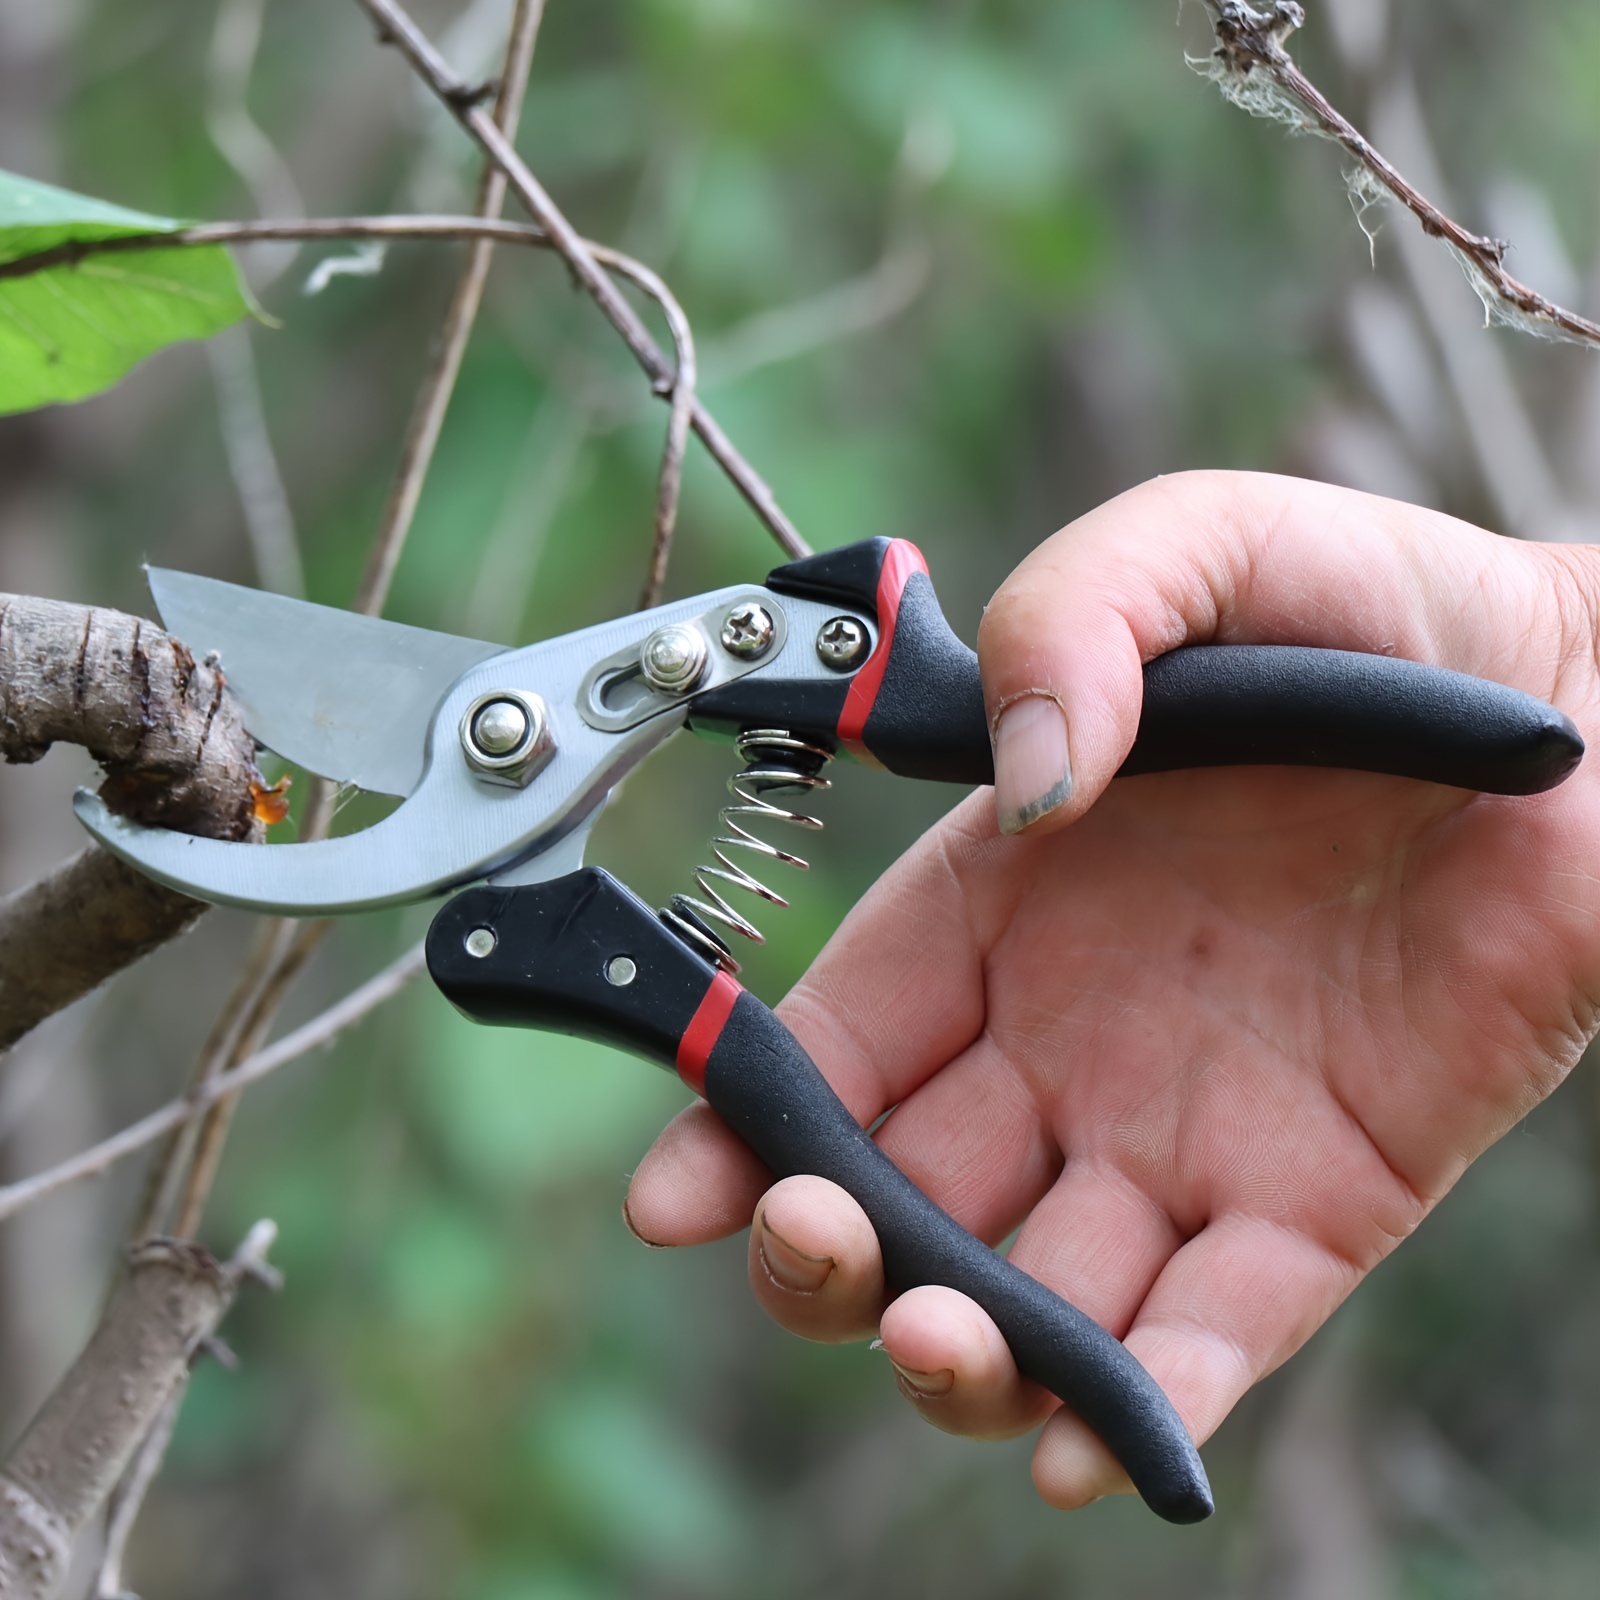 1pc Pruning Shears Hand Pruners Garden Clippers Tree Trimmers